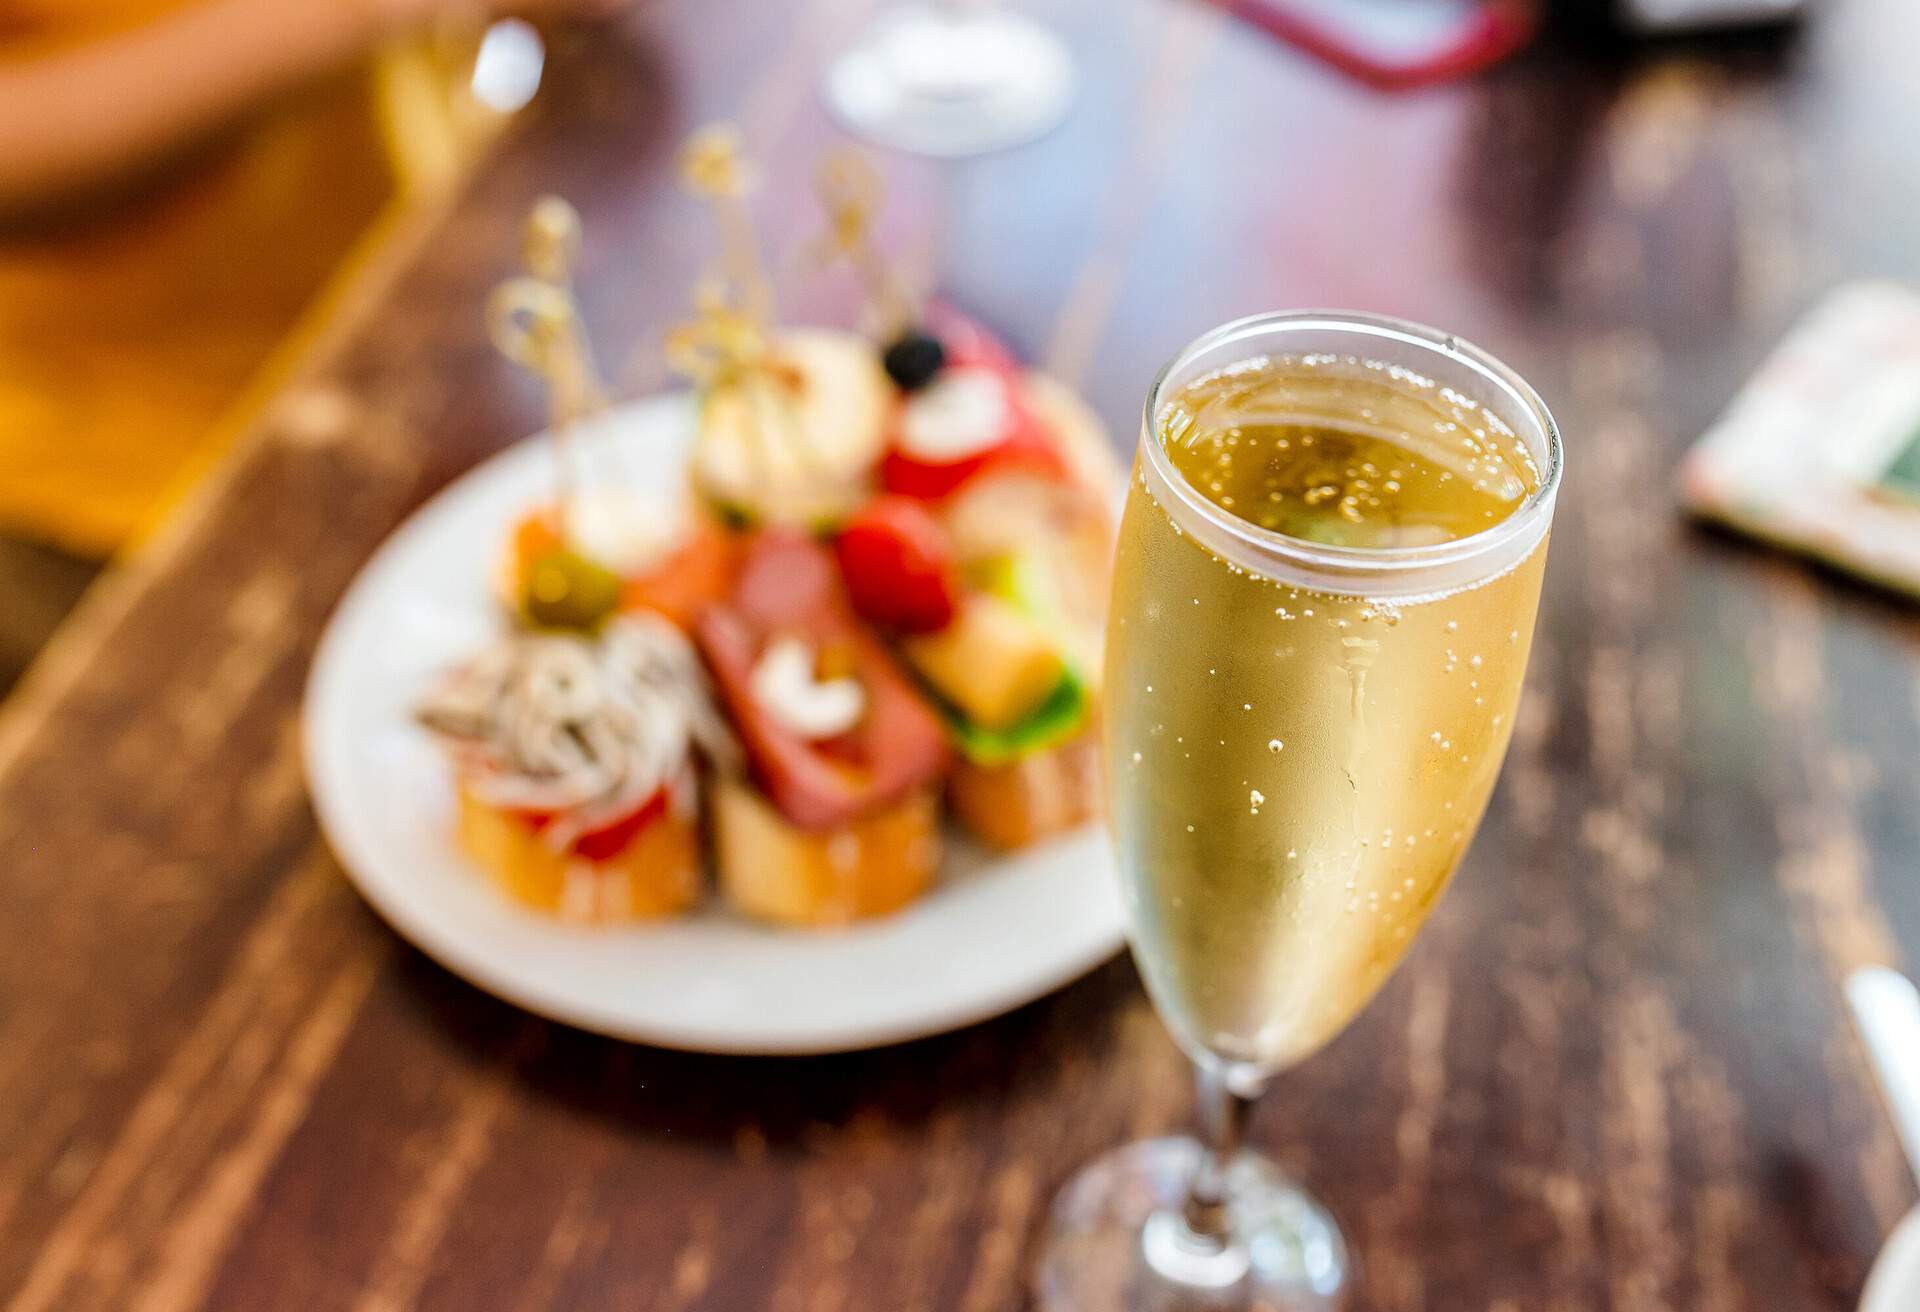 A sparkling glass of Cava wine takes centre stage in the foreground, while a sumptuous plate of food sits tantalisingly in the softly blurred background.